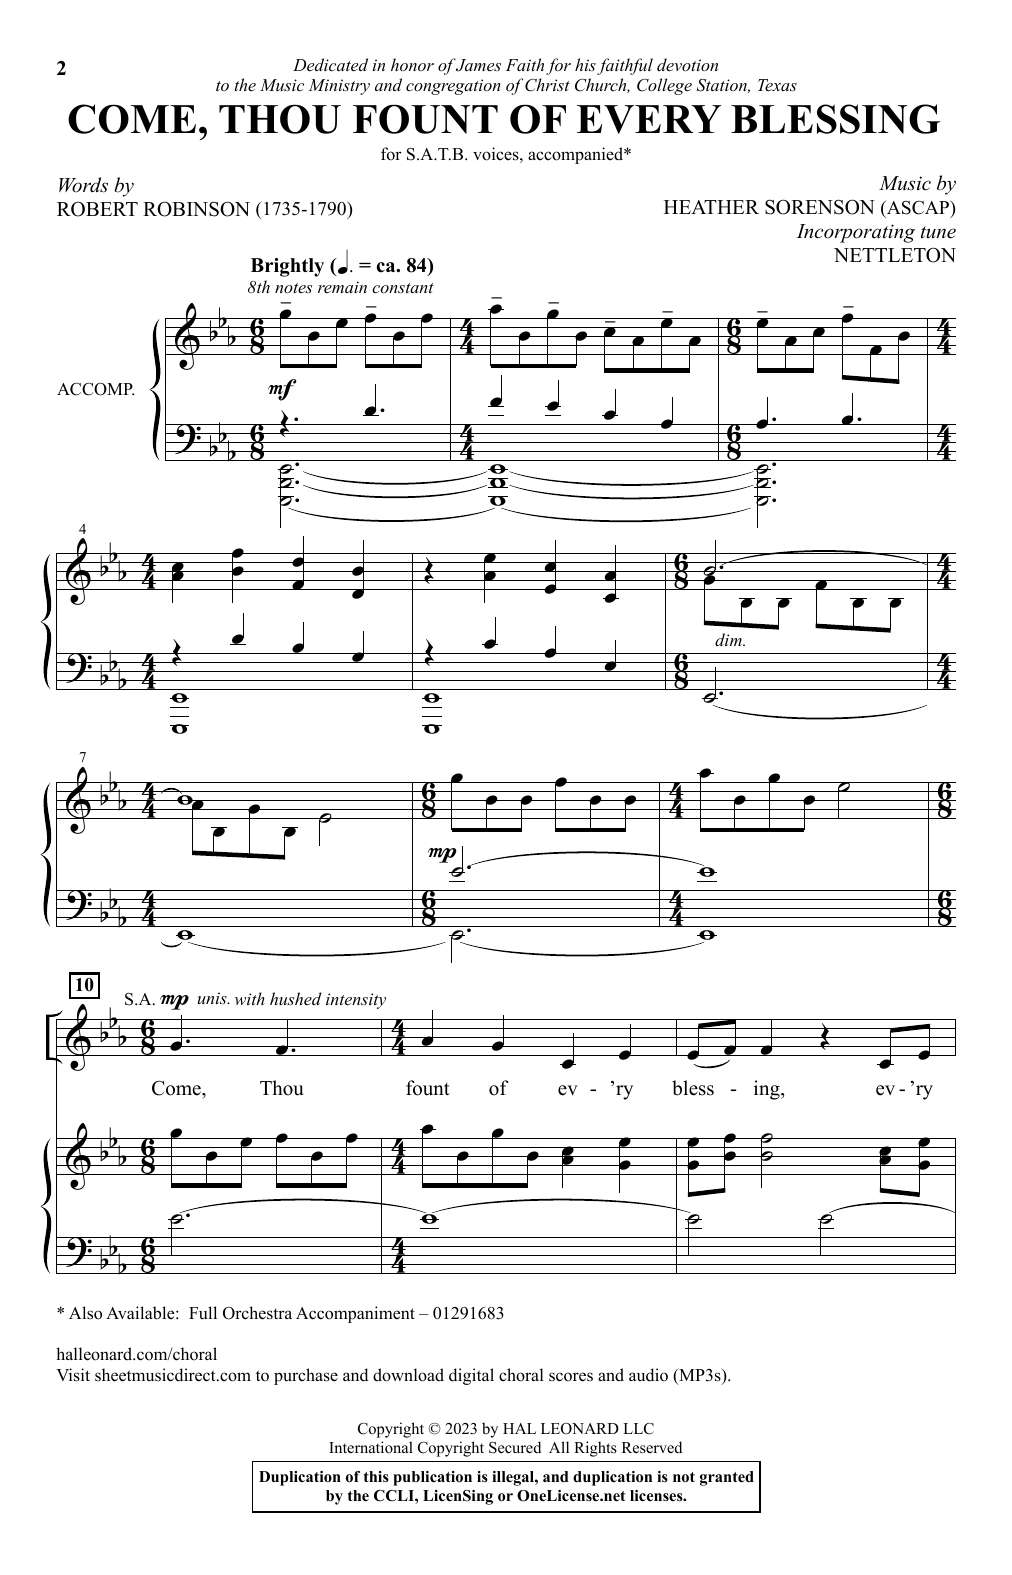 Heather Sorenson Come, Thou Fount of Every Blessing sheet music notes printable PDF score